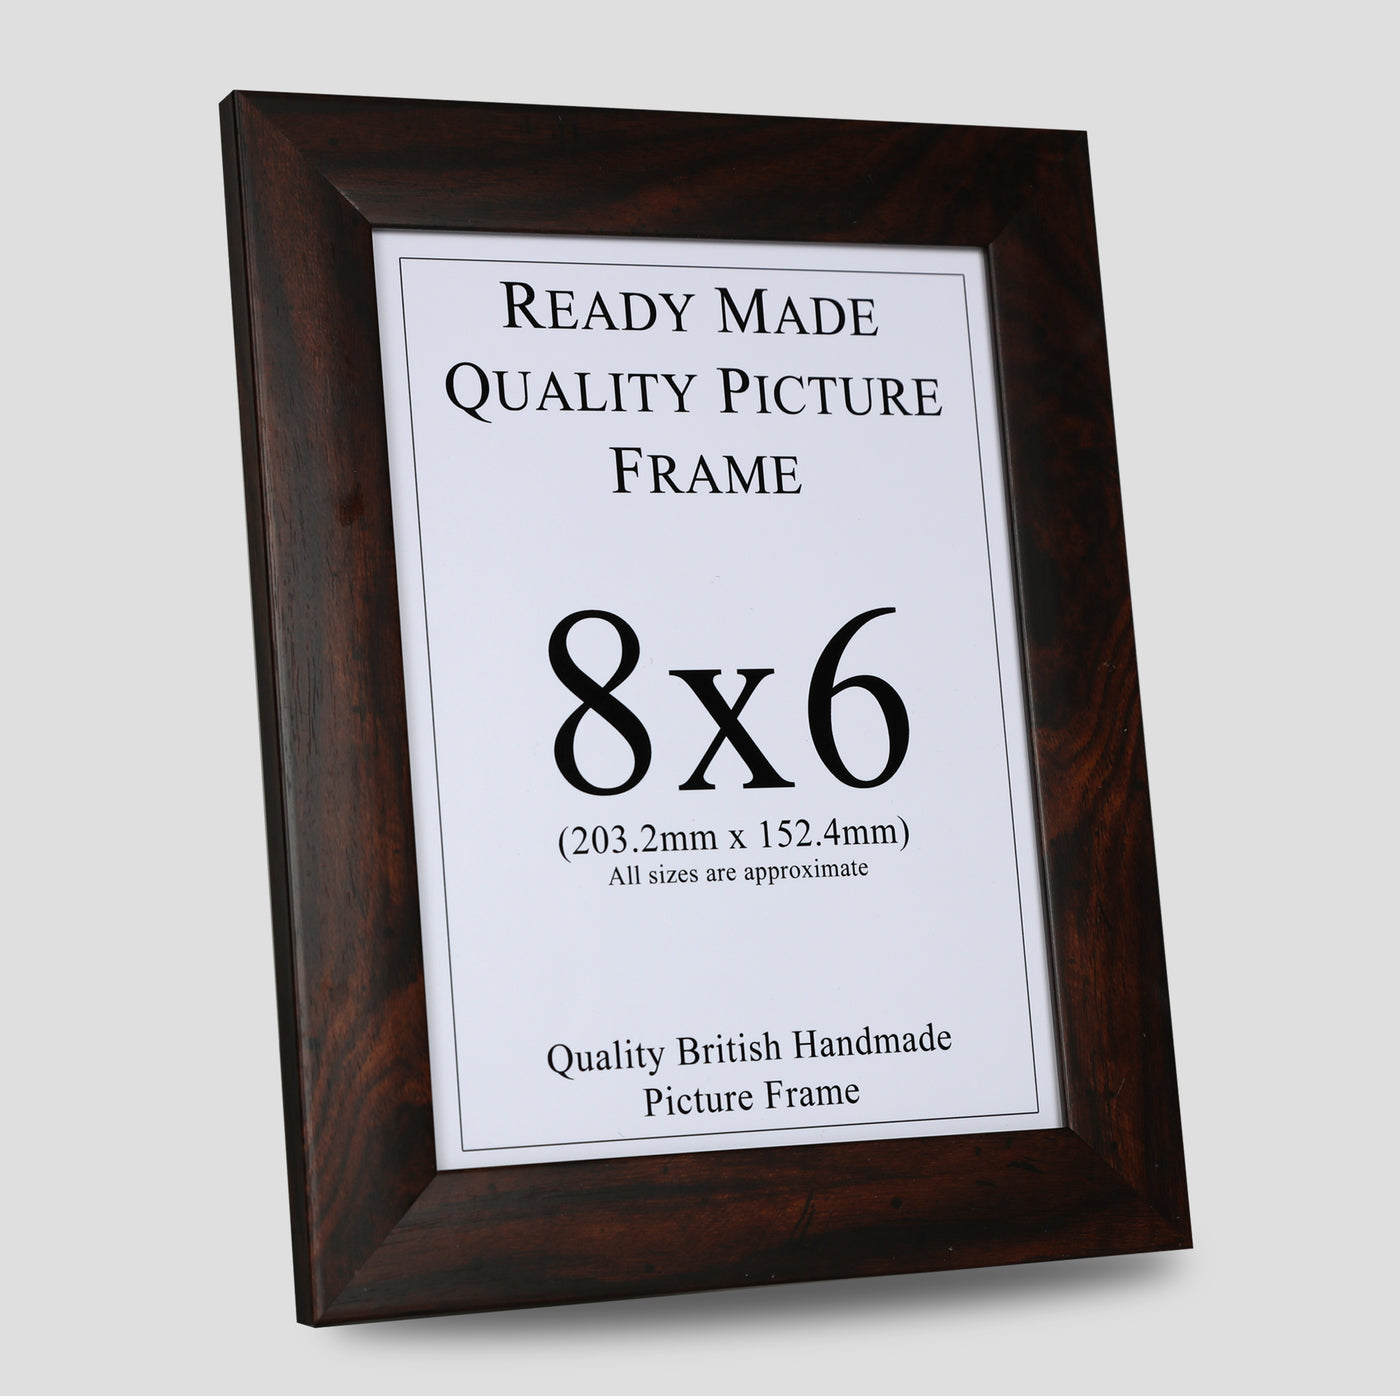 8x6 Walnut Style Picture Frame